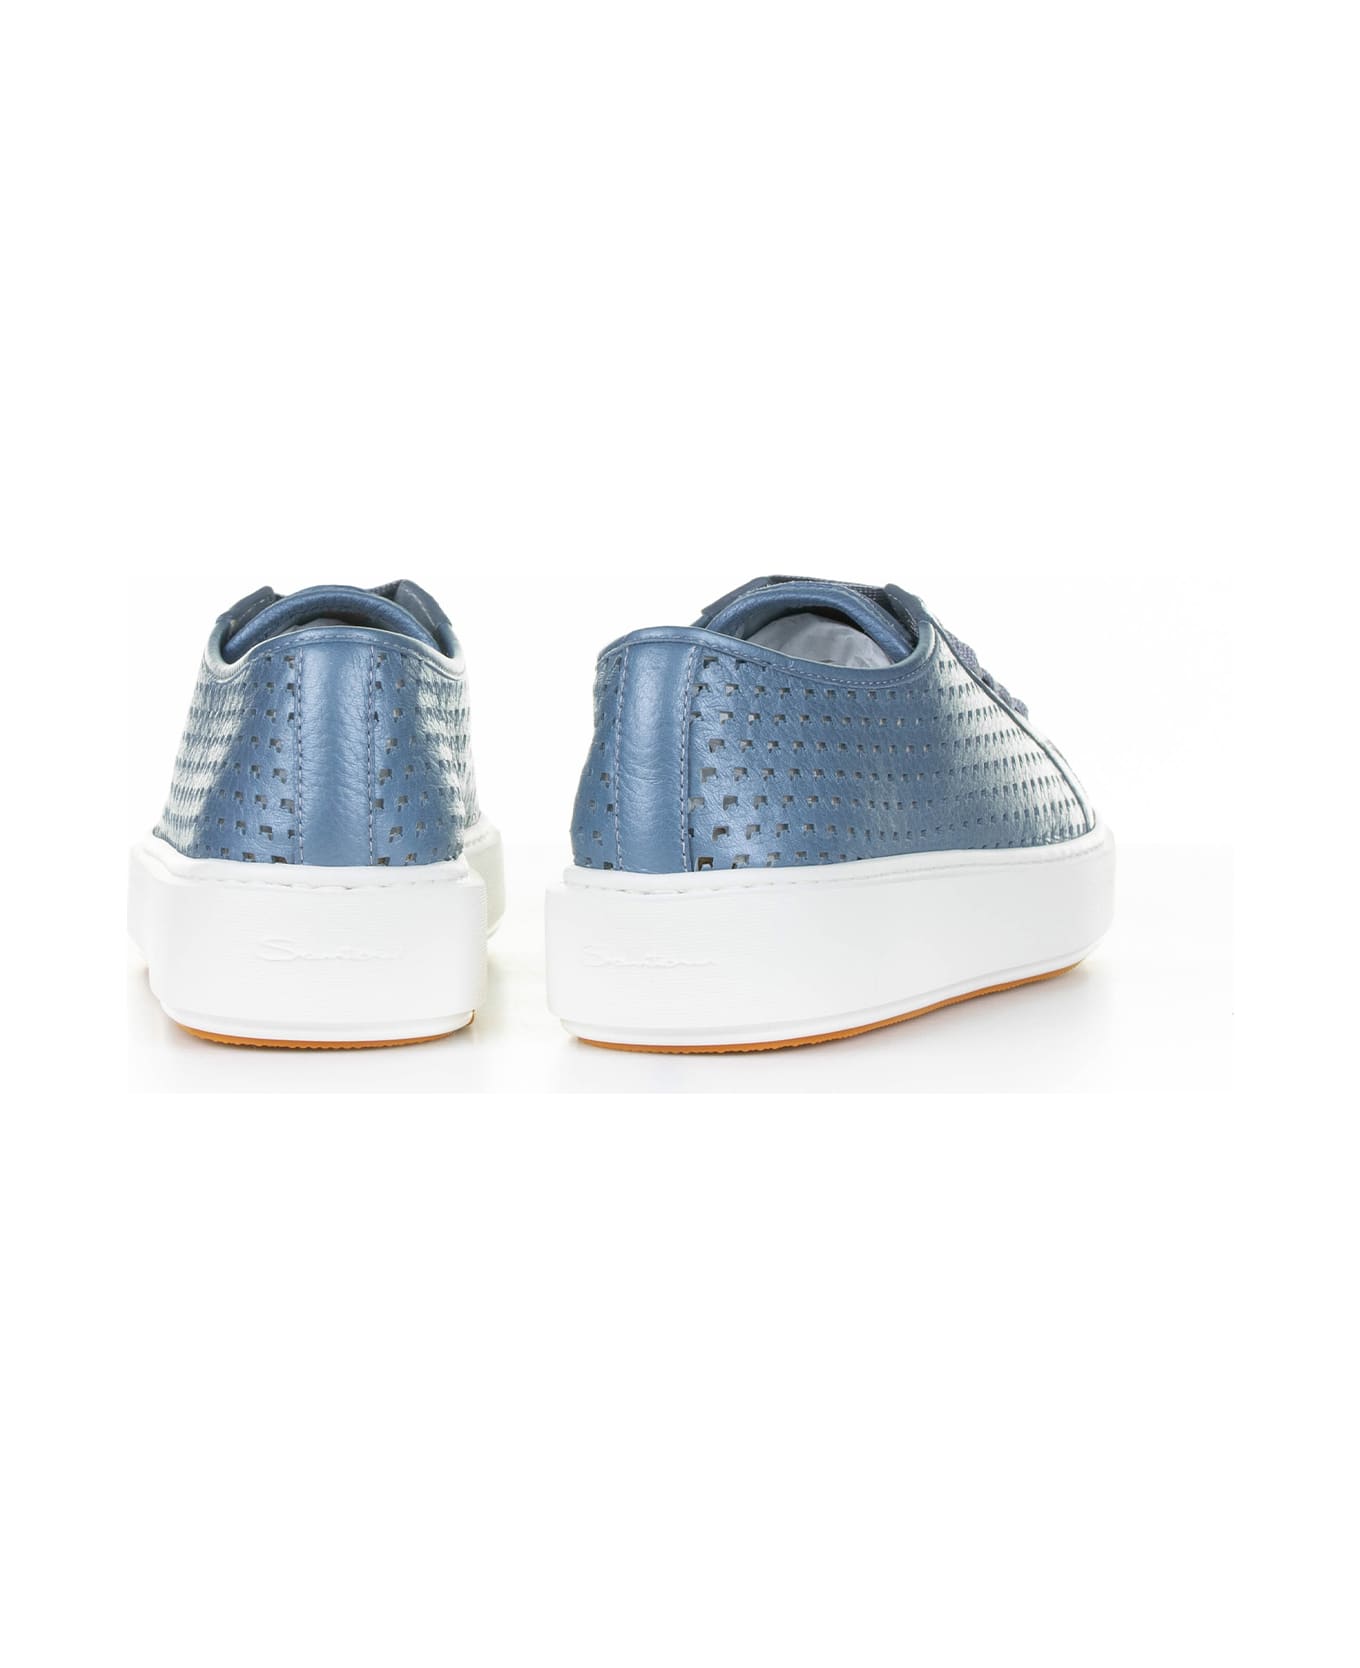 Santoni Light Blue Sneaker In Laminated Perforated Leather - LIGHT BLUE